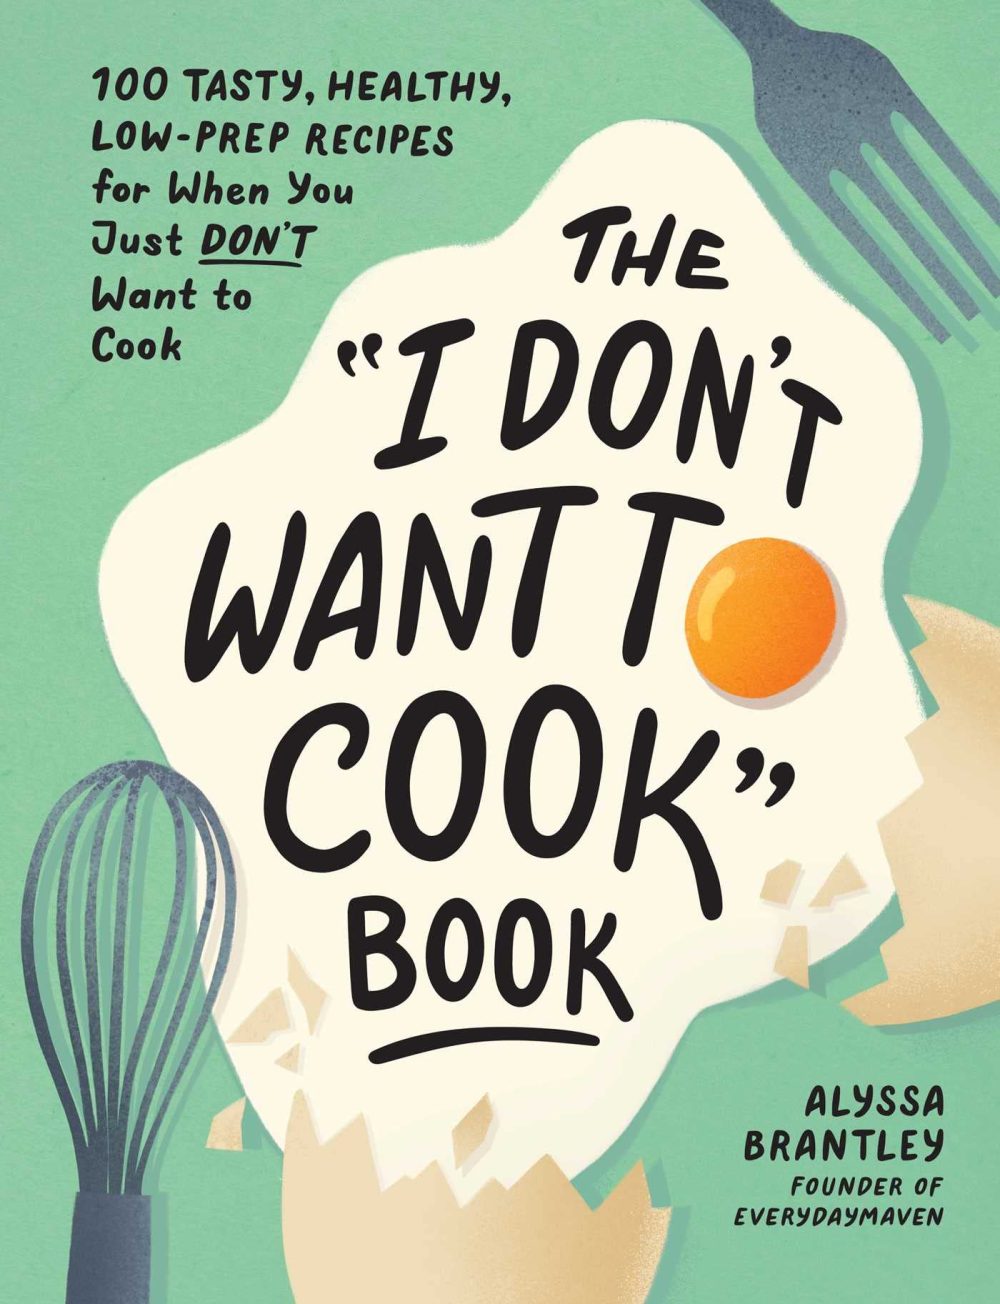 THE “I DON’T WANT TO COOK” BOOK by Alyssa Brantley